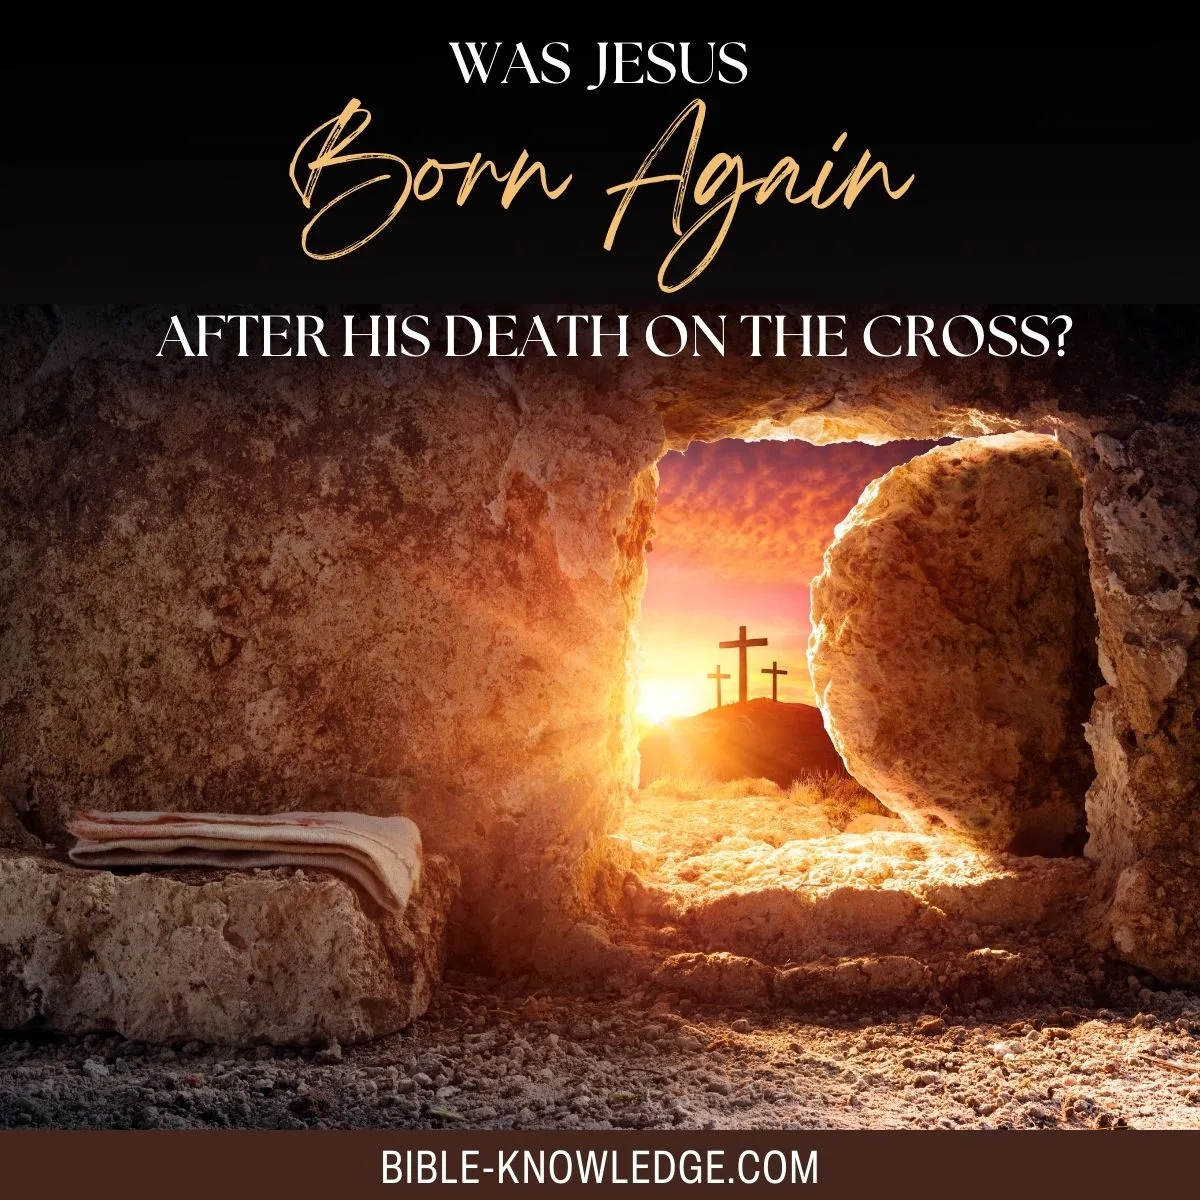 Was Jesus Born Again After His Death on the Cross?